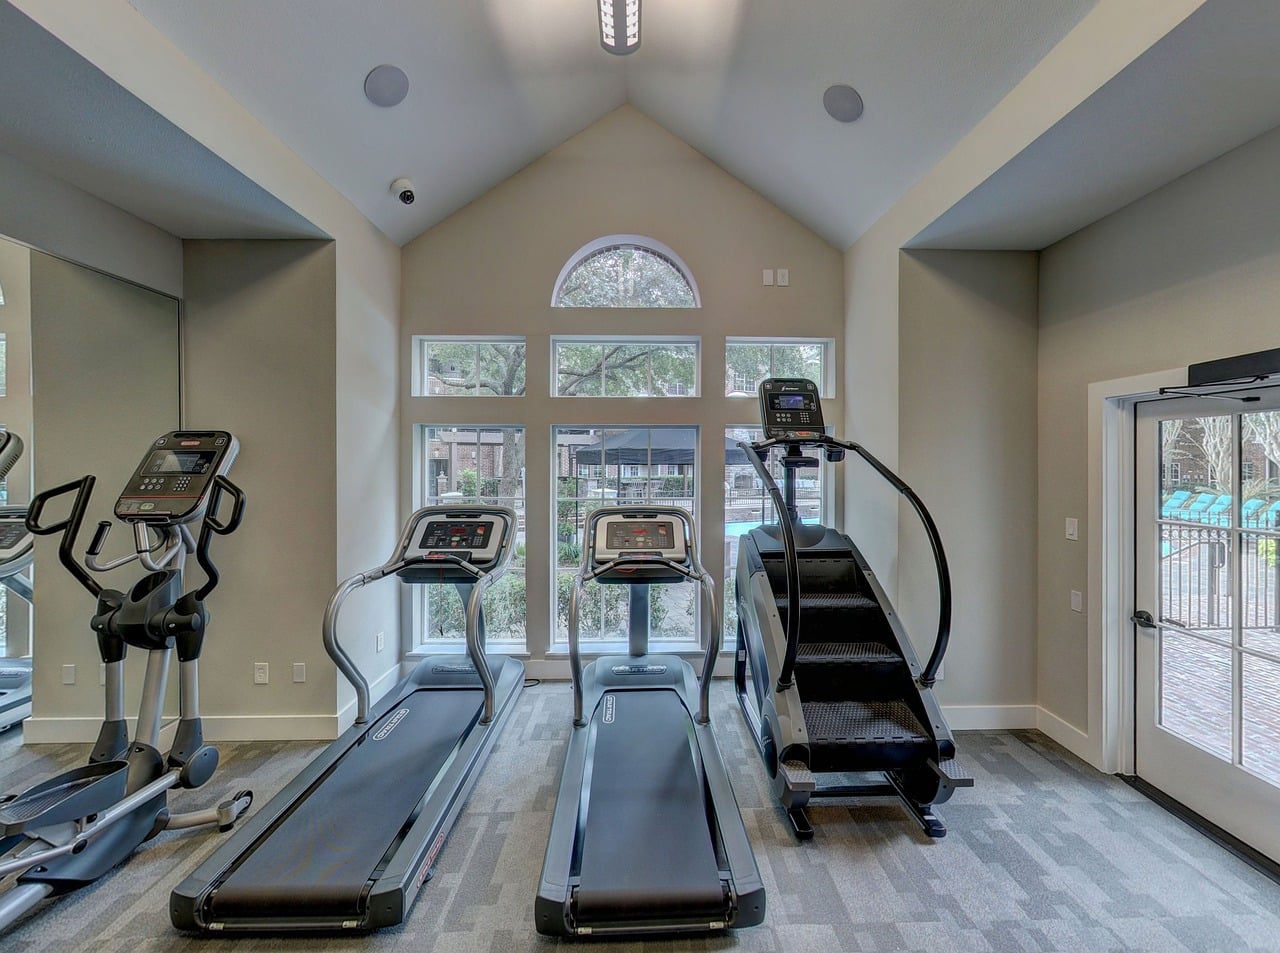 Designing a Functional & Motivating Home Gym